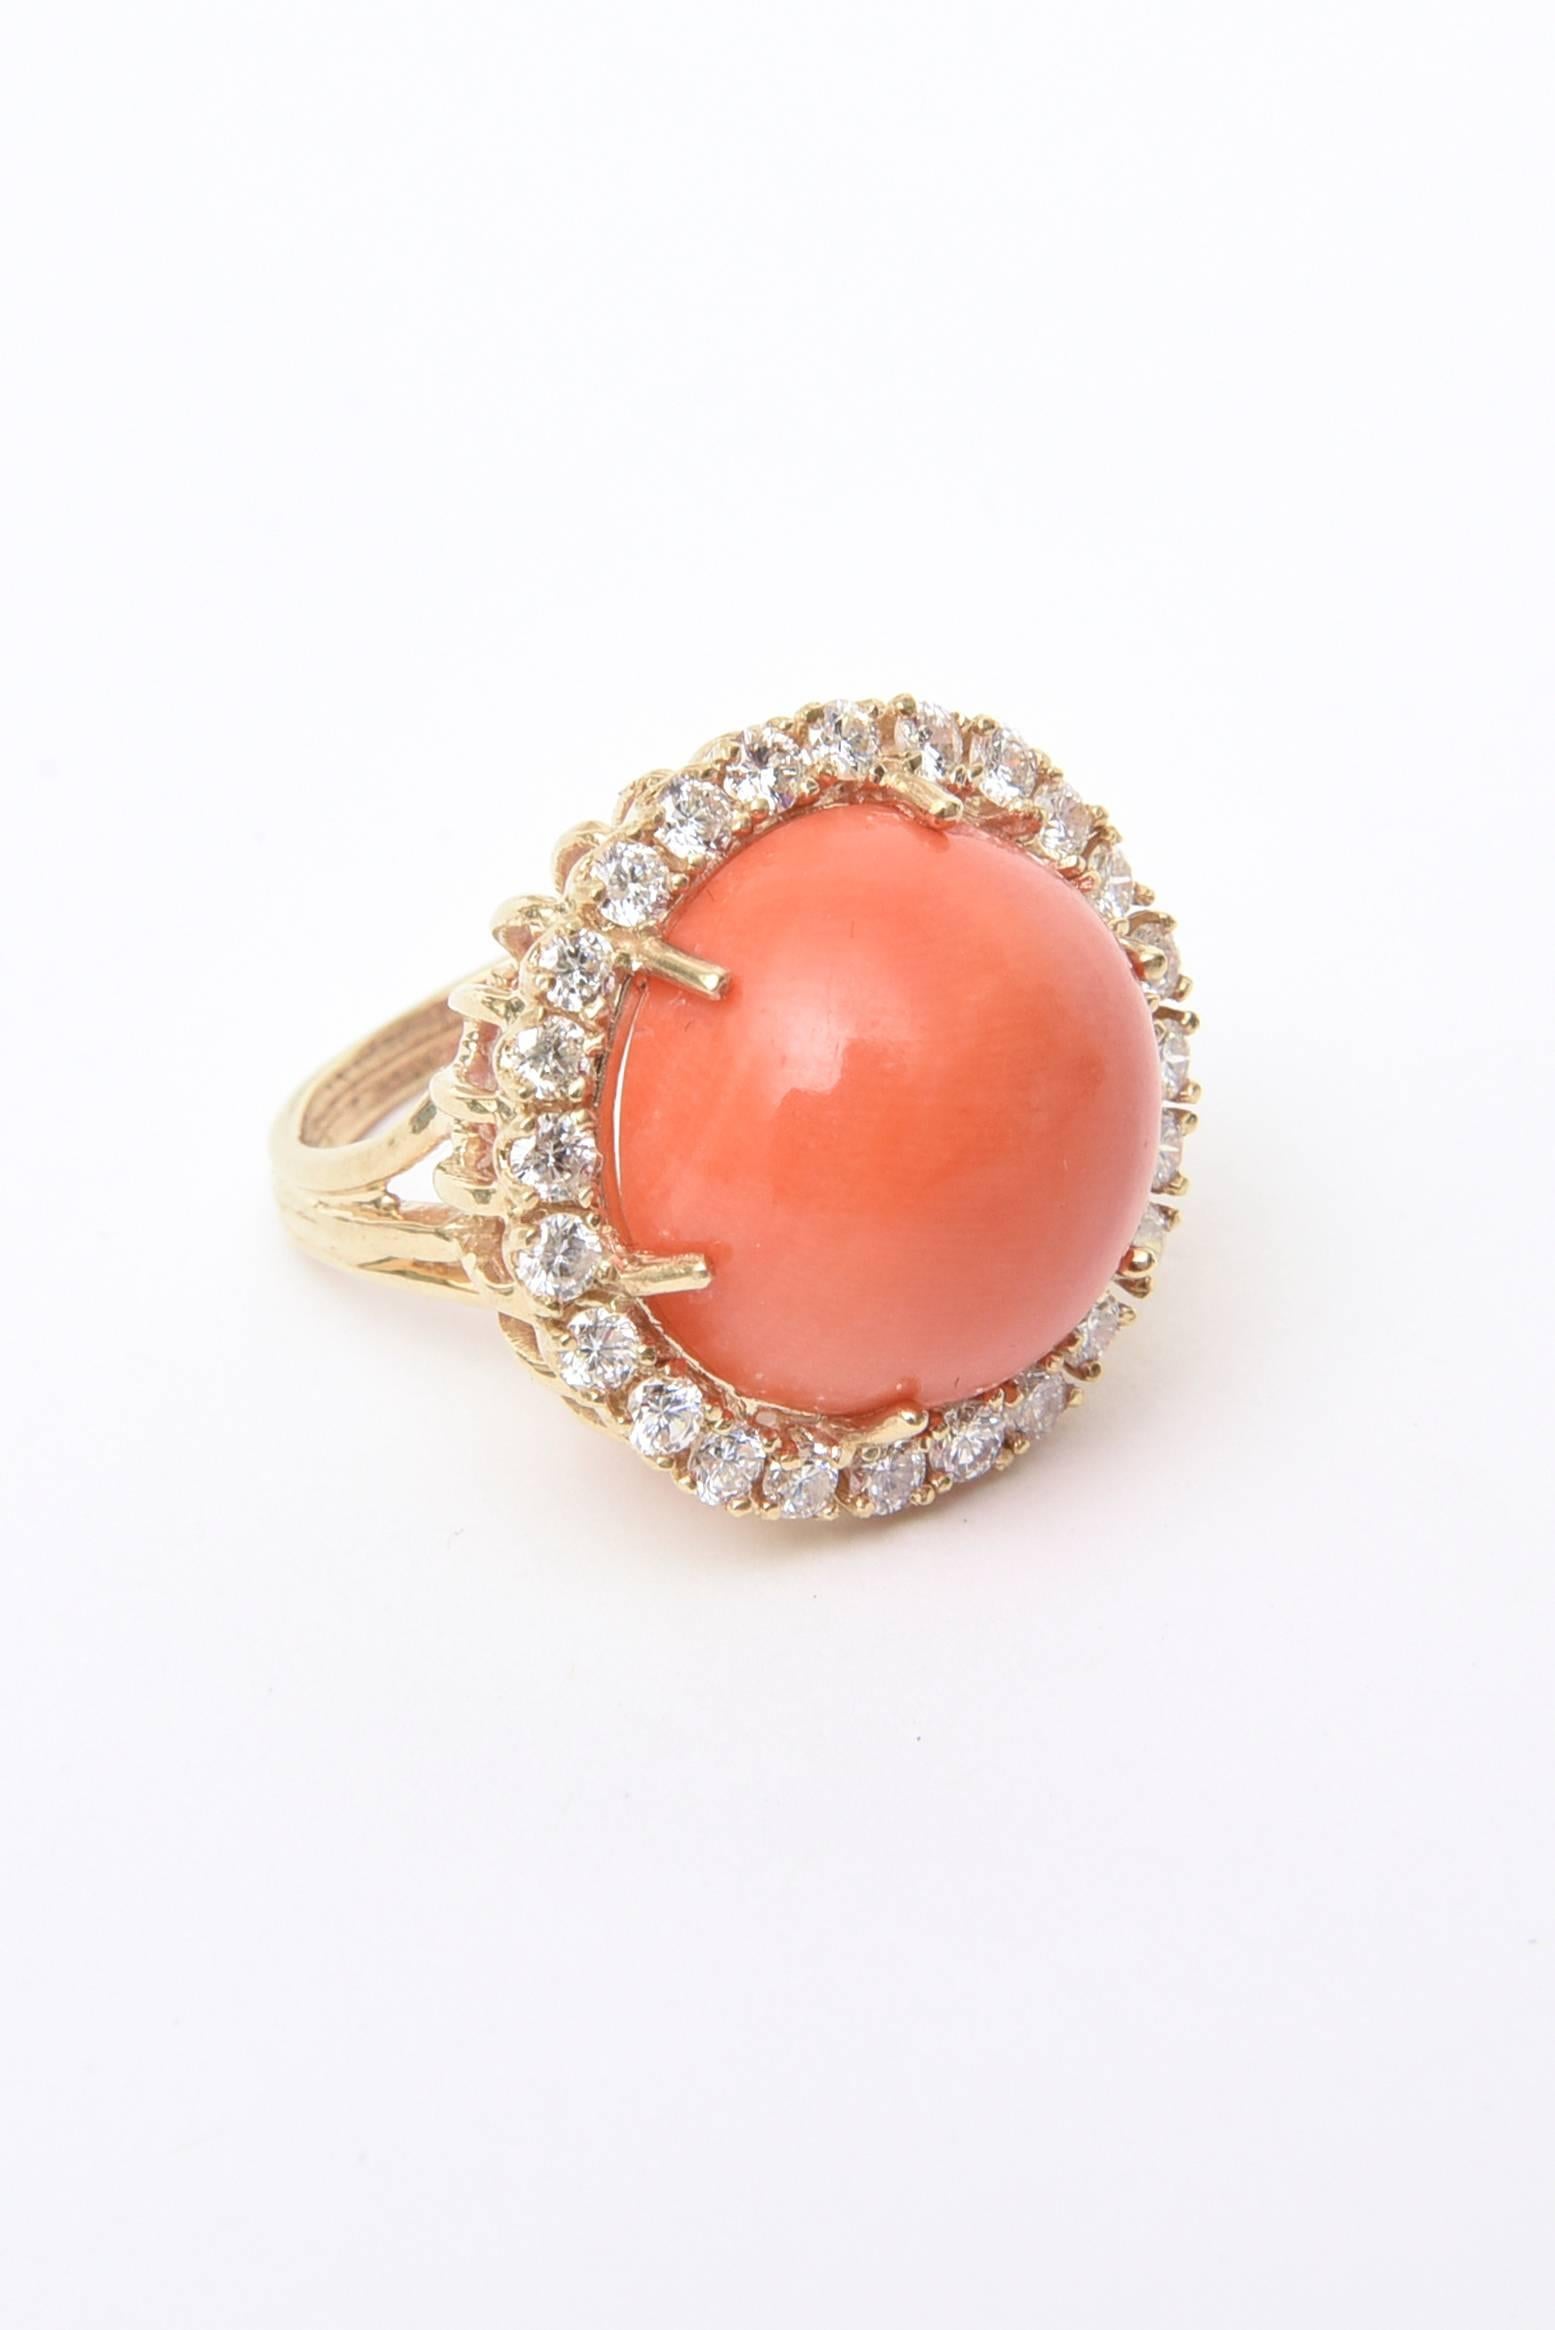 This impressive cabochon cut gorgeous angel skin coral is pronged set surrounded by approximately 25-26 diamonds of VS-Si clarity and GH color. It is set on the sides in a basket weave design o f14K yellow gold.
This lovely dome cocktail ring is